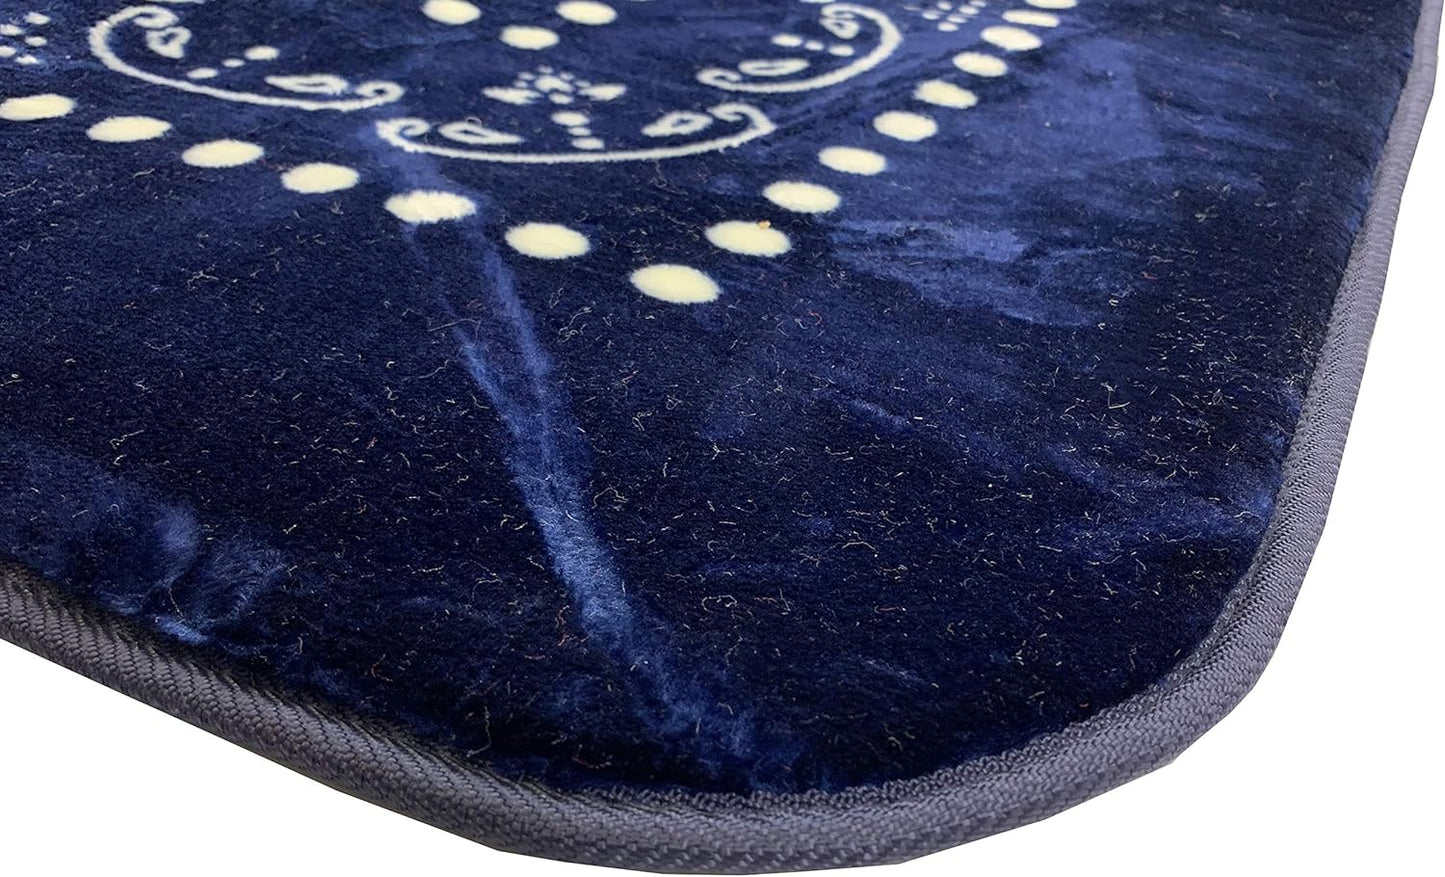 Blanket Paisley Oriental Design Area Rug Rugs Fabric Backing (Navy Blue, 6 x 6 (6'1' x 6'1")